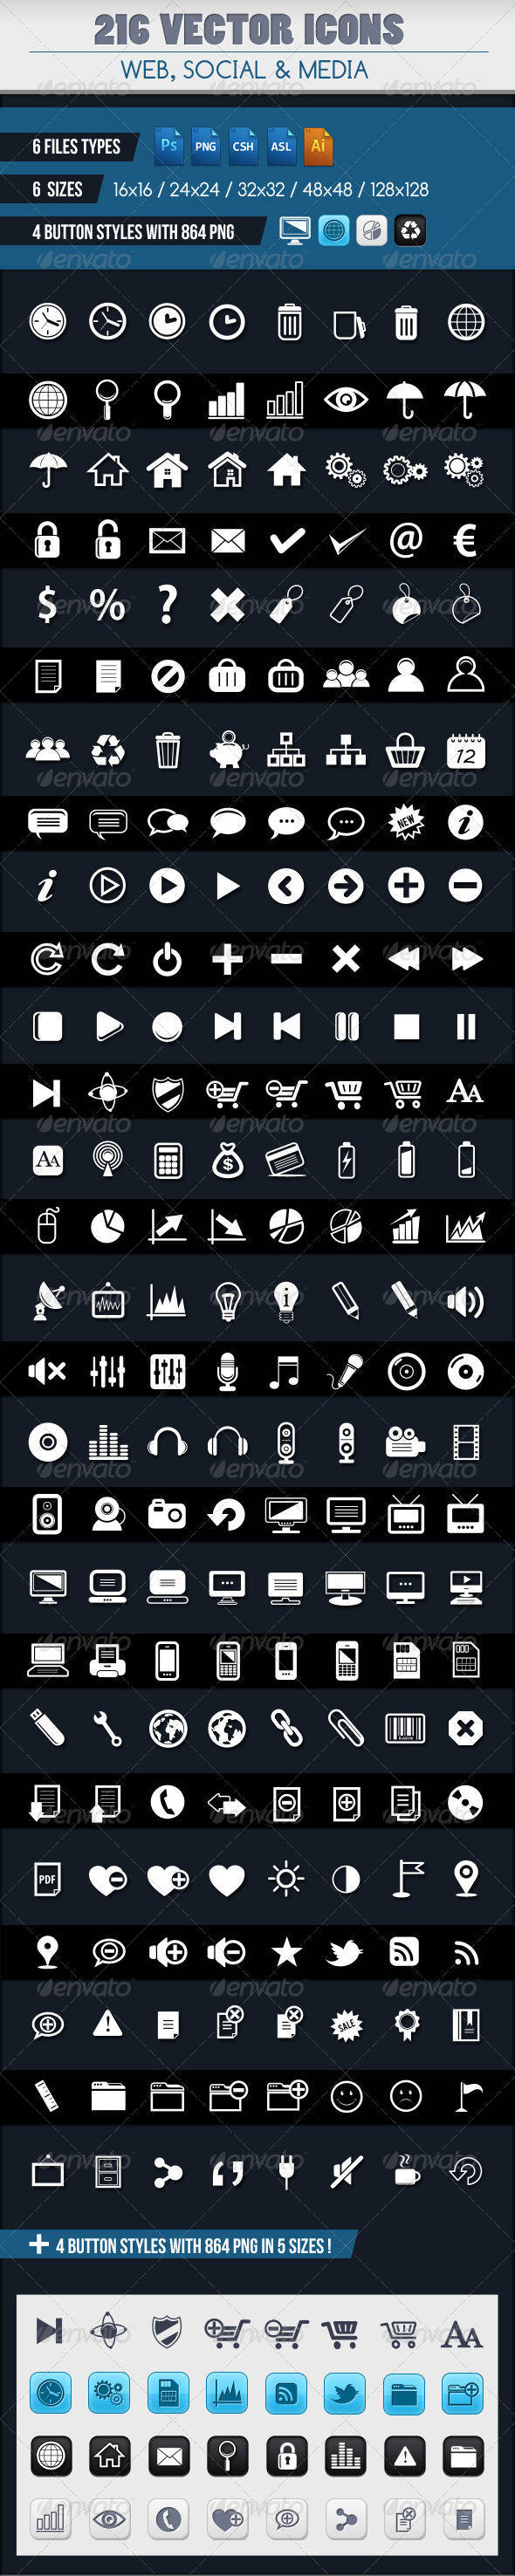 224 Vector Icons Set